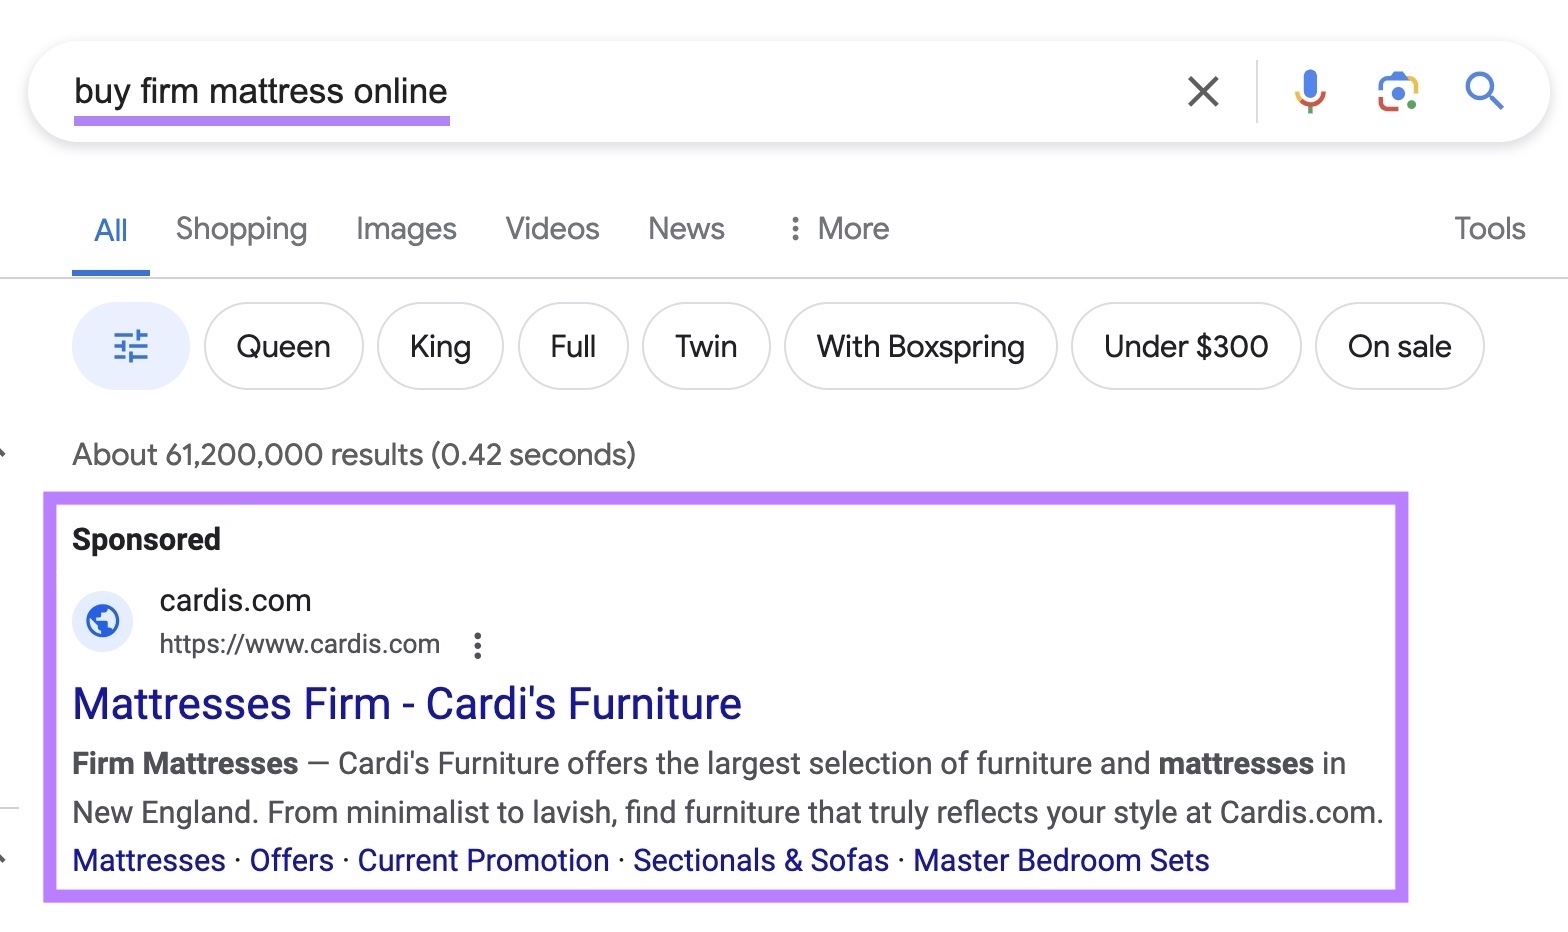 Google search ad appearing for “buy firm mattress online" query